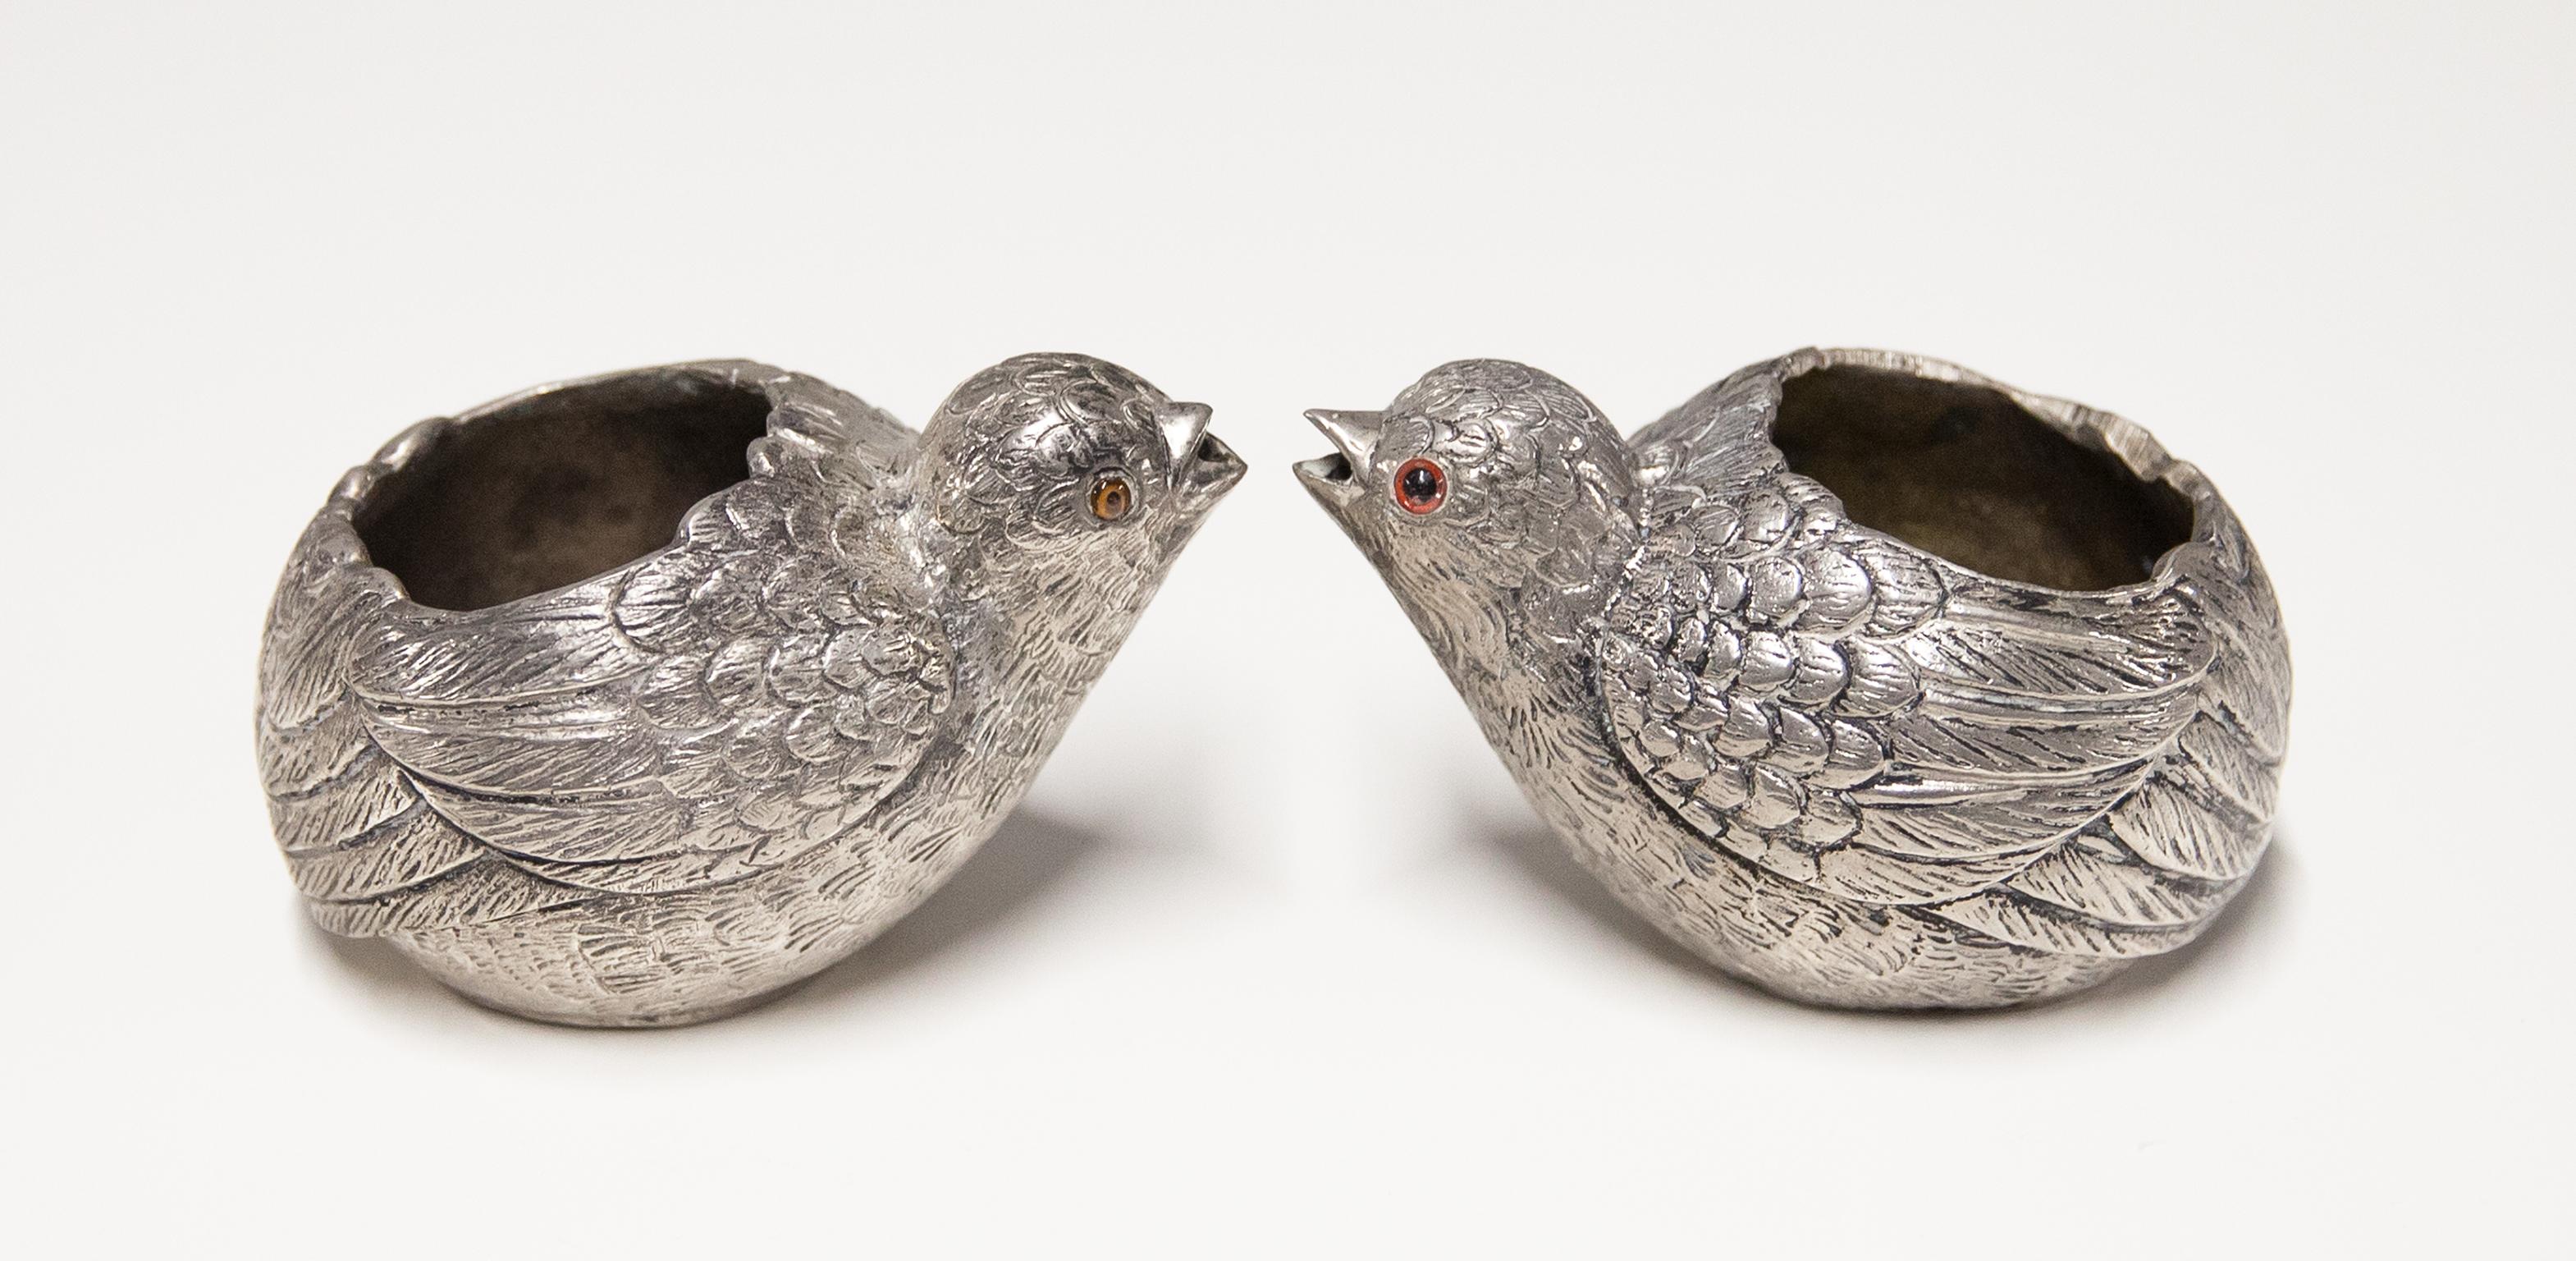 Gucci Vintage quail tea light candle holders in silver plated metal and little sapphire eyes and signed with Gucci. Good good vintage condition.